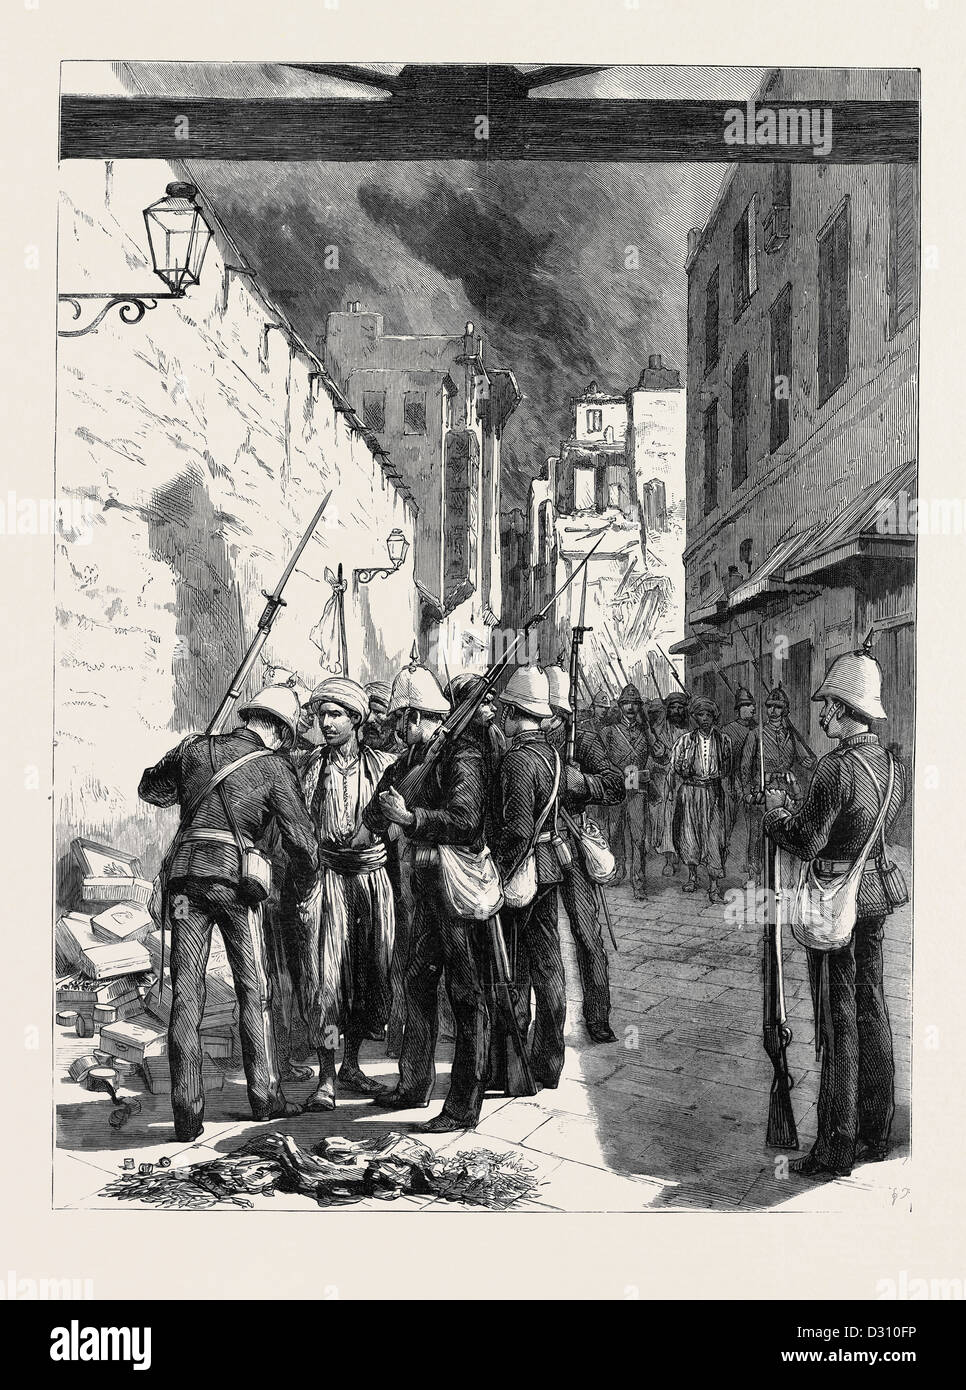 THE BURNING OF ALEXANDRIA: BRITISH MARINES ARRESTING ARAB LOOTERS AT THE CUSTOM HOUSE GATE, EGYPT Stock Photo